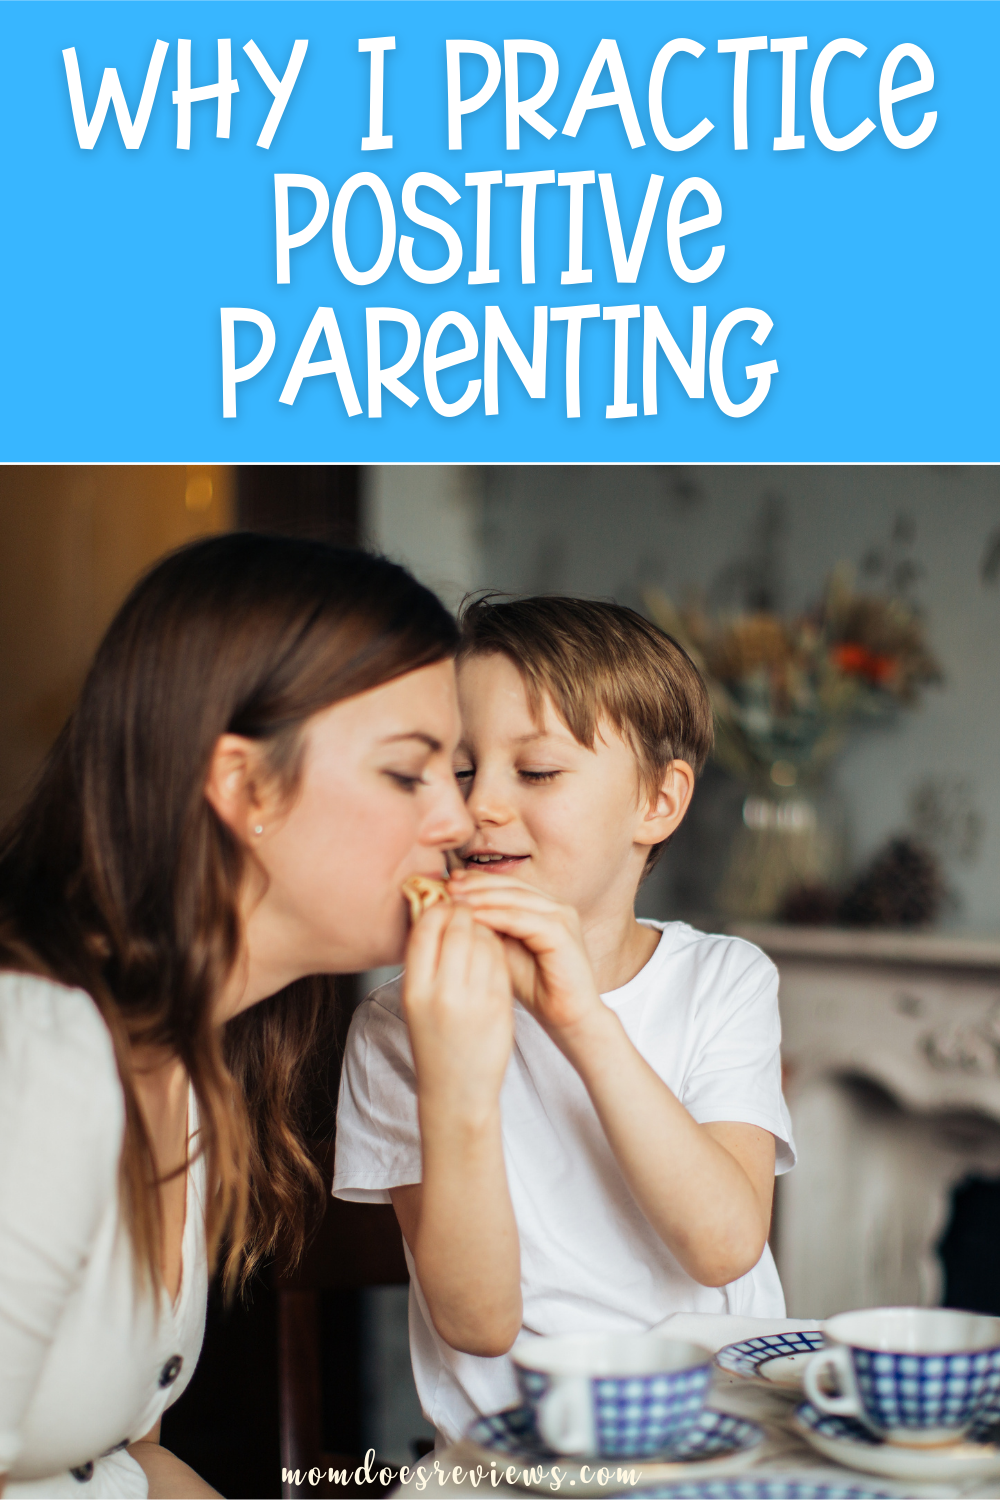 3 Reasons Why I Practice Positive Parenting